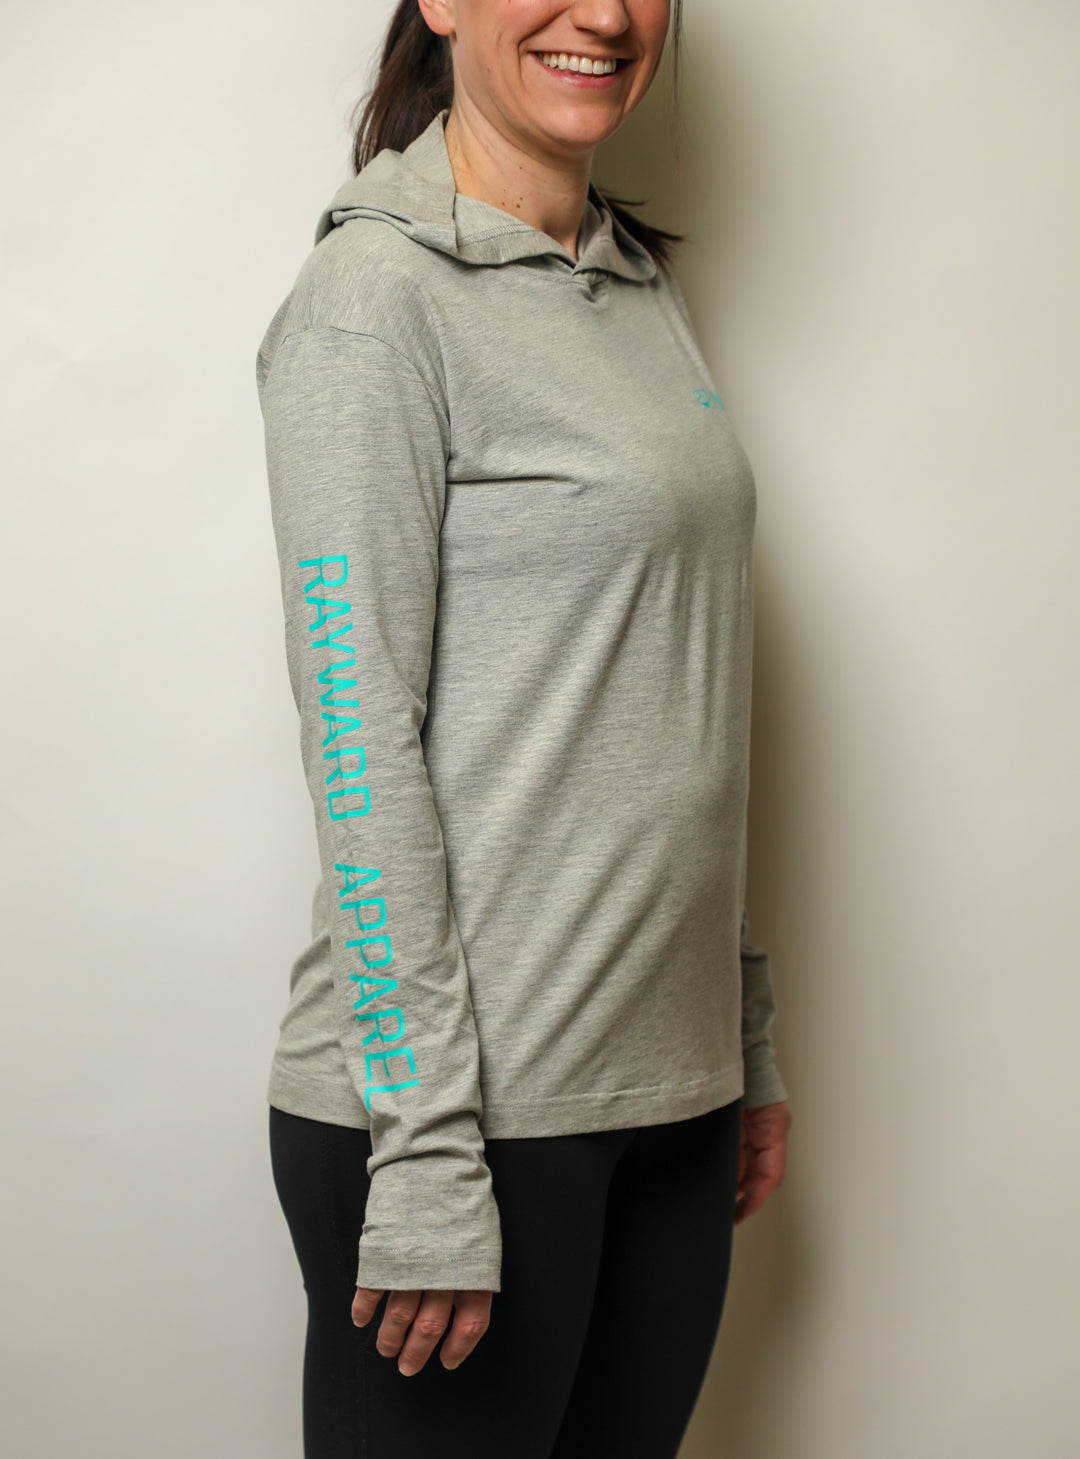 Women's Long Sleeve Hooded Shirt, UPF 45 Bamboo, Crescent City Collection - Rayward Apparel